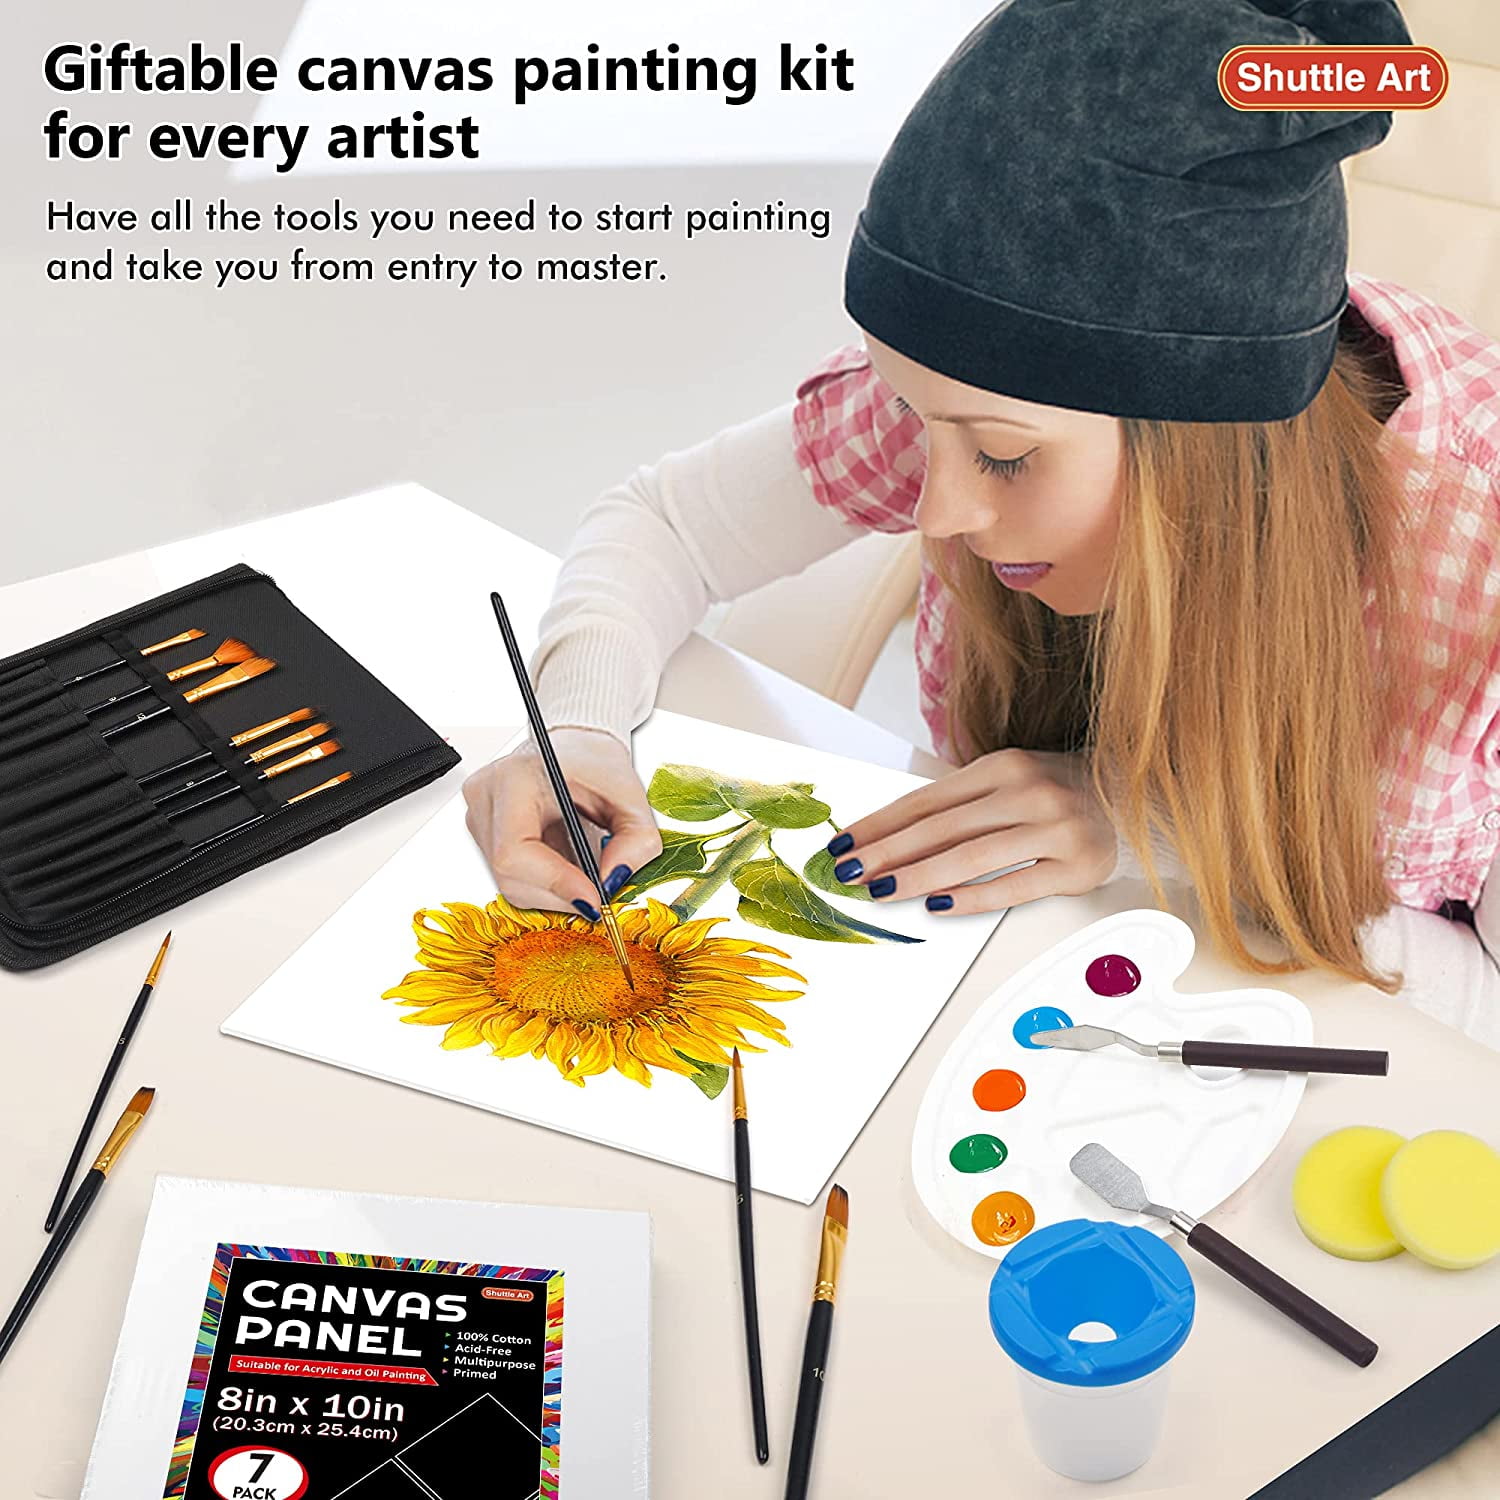 Art Equipment Set Canvas Board Paint Palette And Bucket With Paint Brushes  Stock Illustration - Download Image Now - iStock